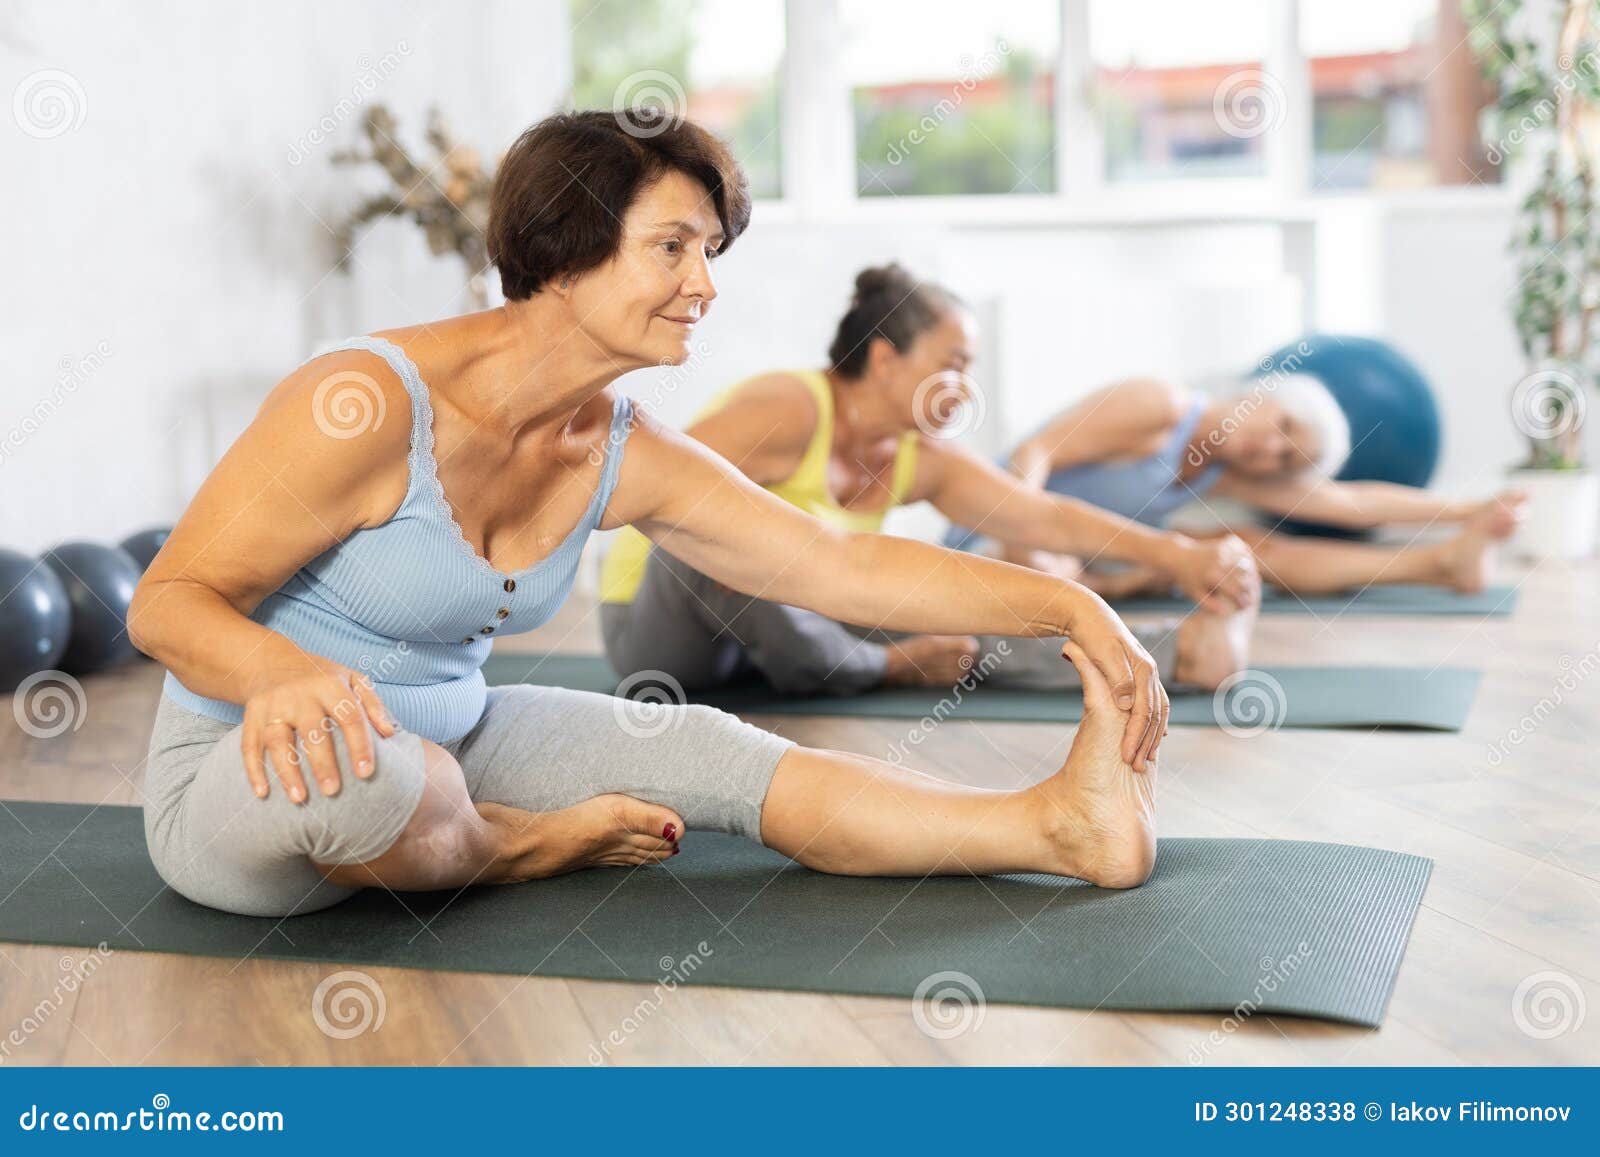 Seated side lean with hands behind a head yoga asanas set/illustration  posters for the wall • posters vector, sport, fitness | myloview.com